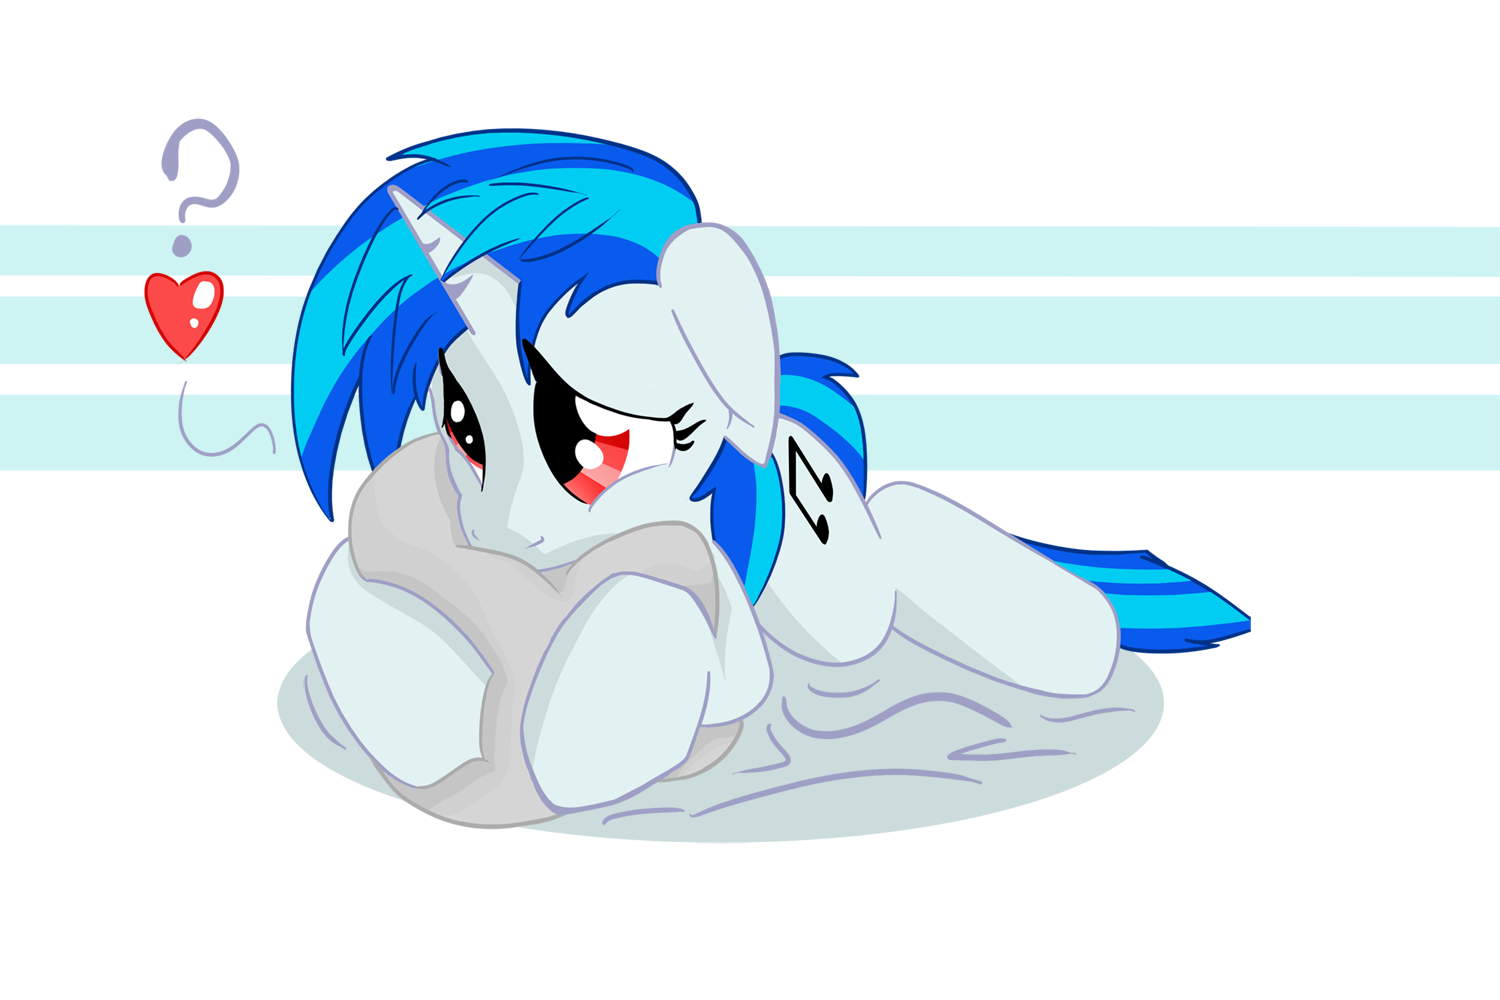 Vinyl Scratch- Do you love me? by Matackable